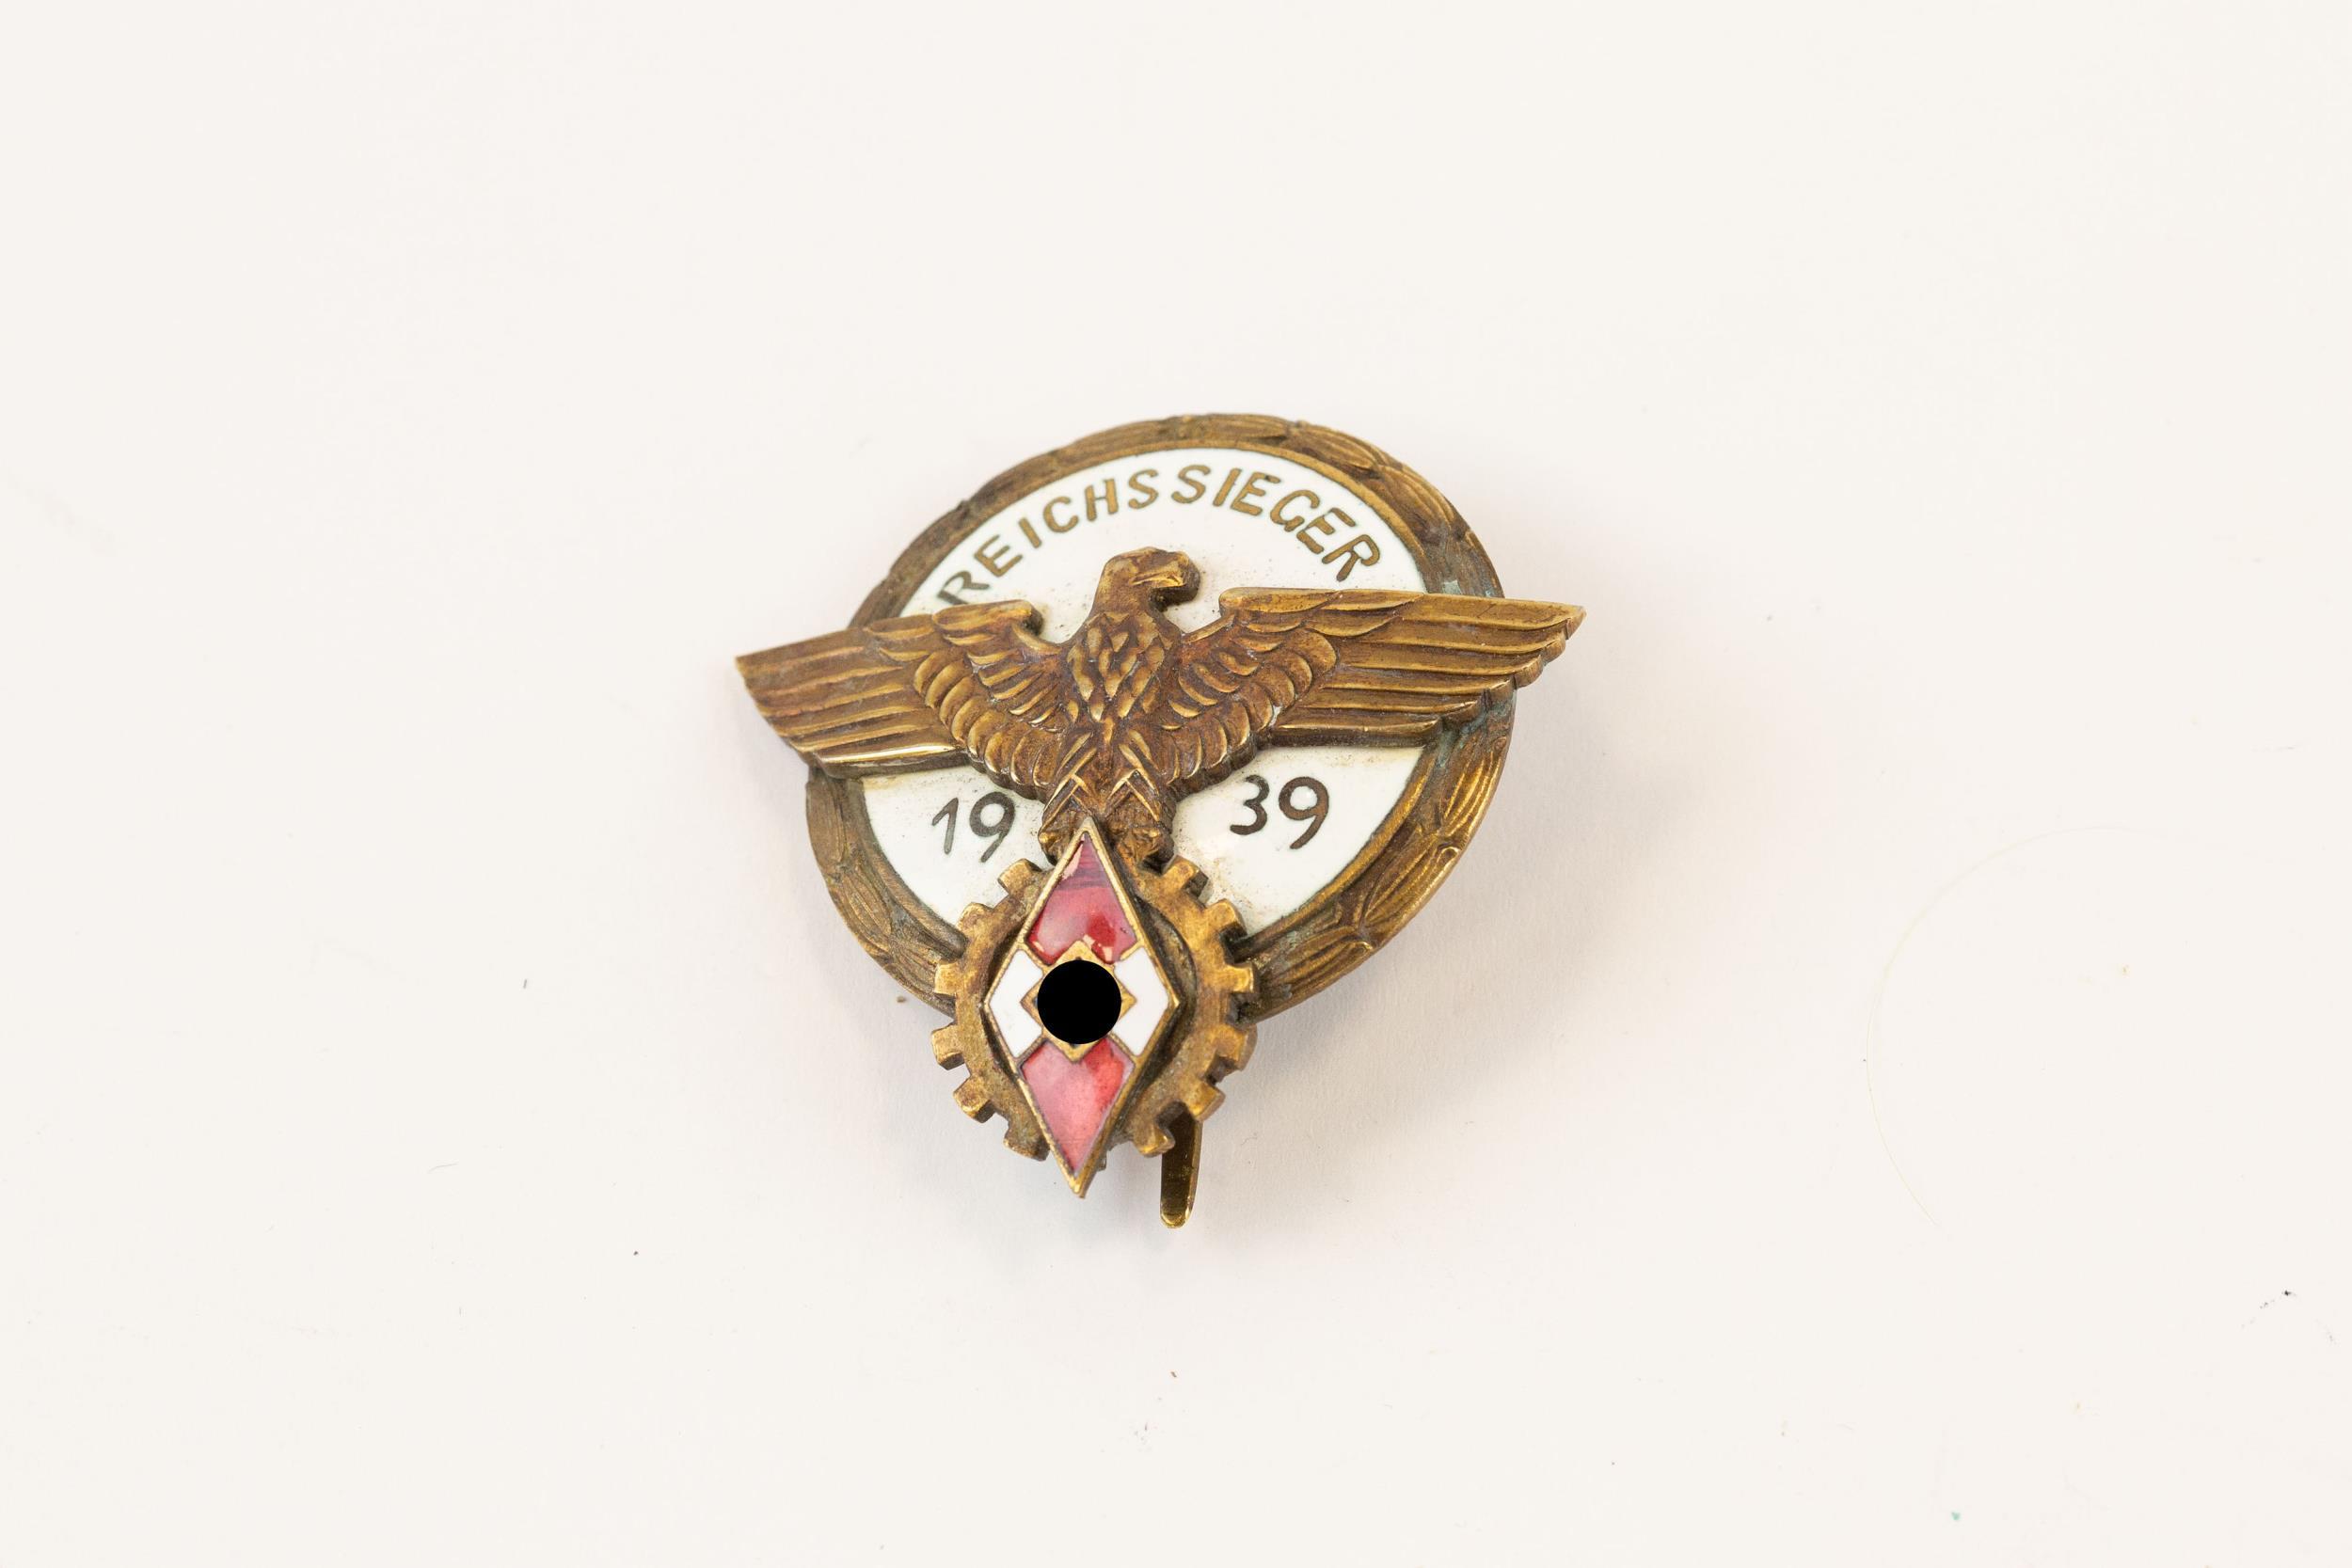 A Third Reich Hitler Youth 1939 Reichssieger pin back enamelled badge. GC £200-250